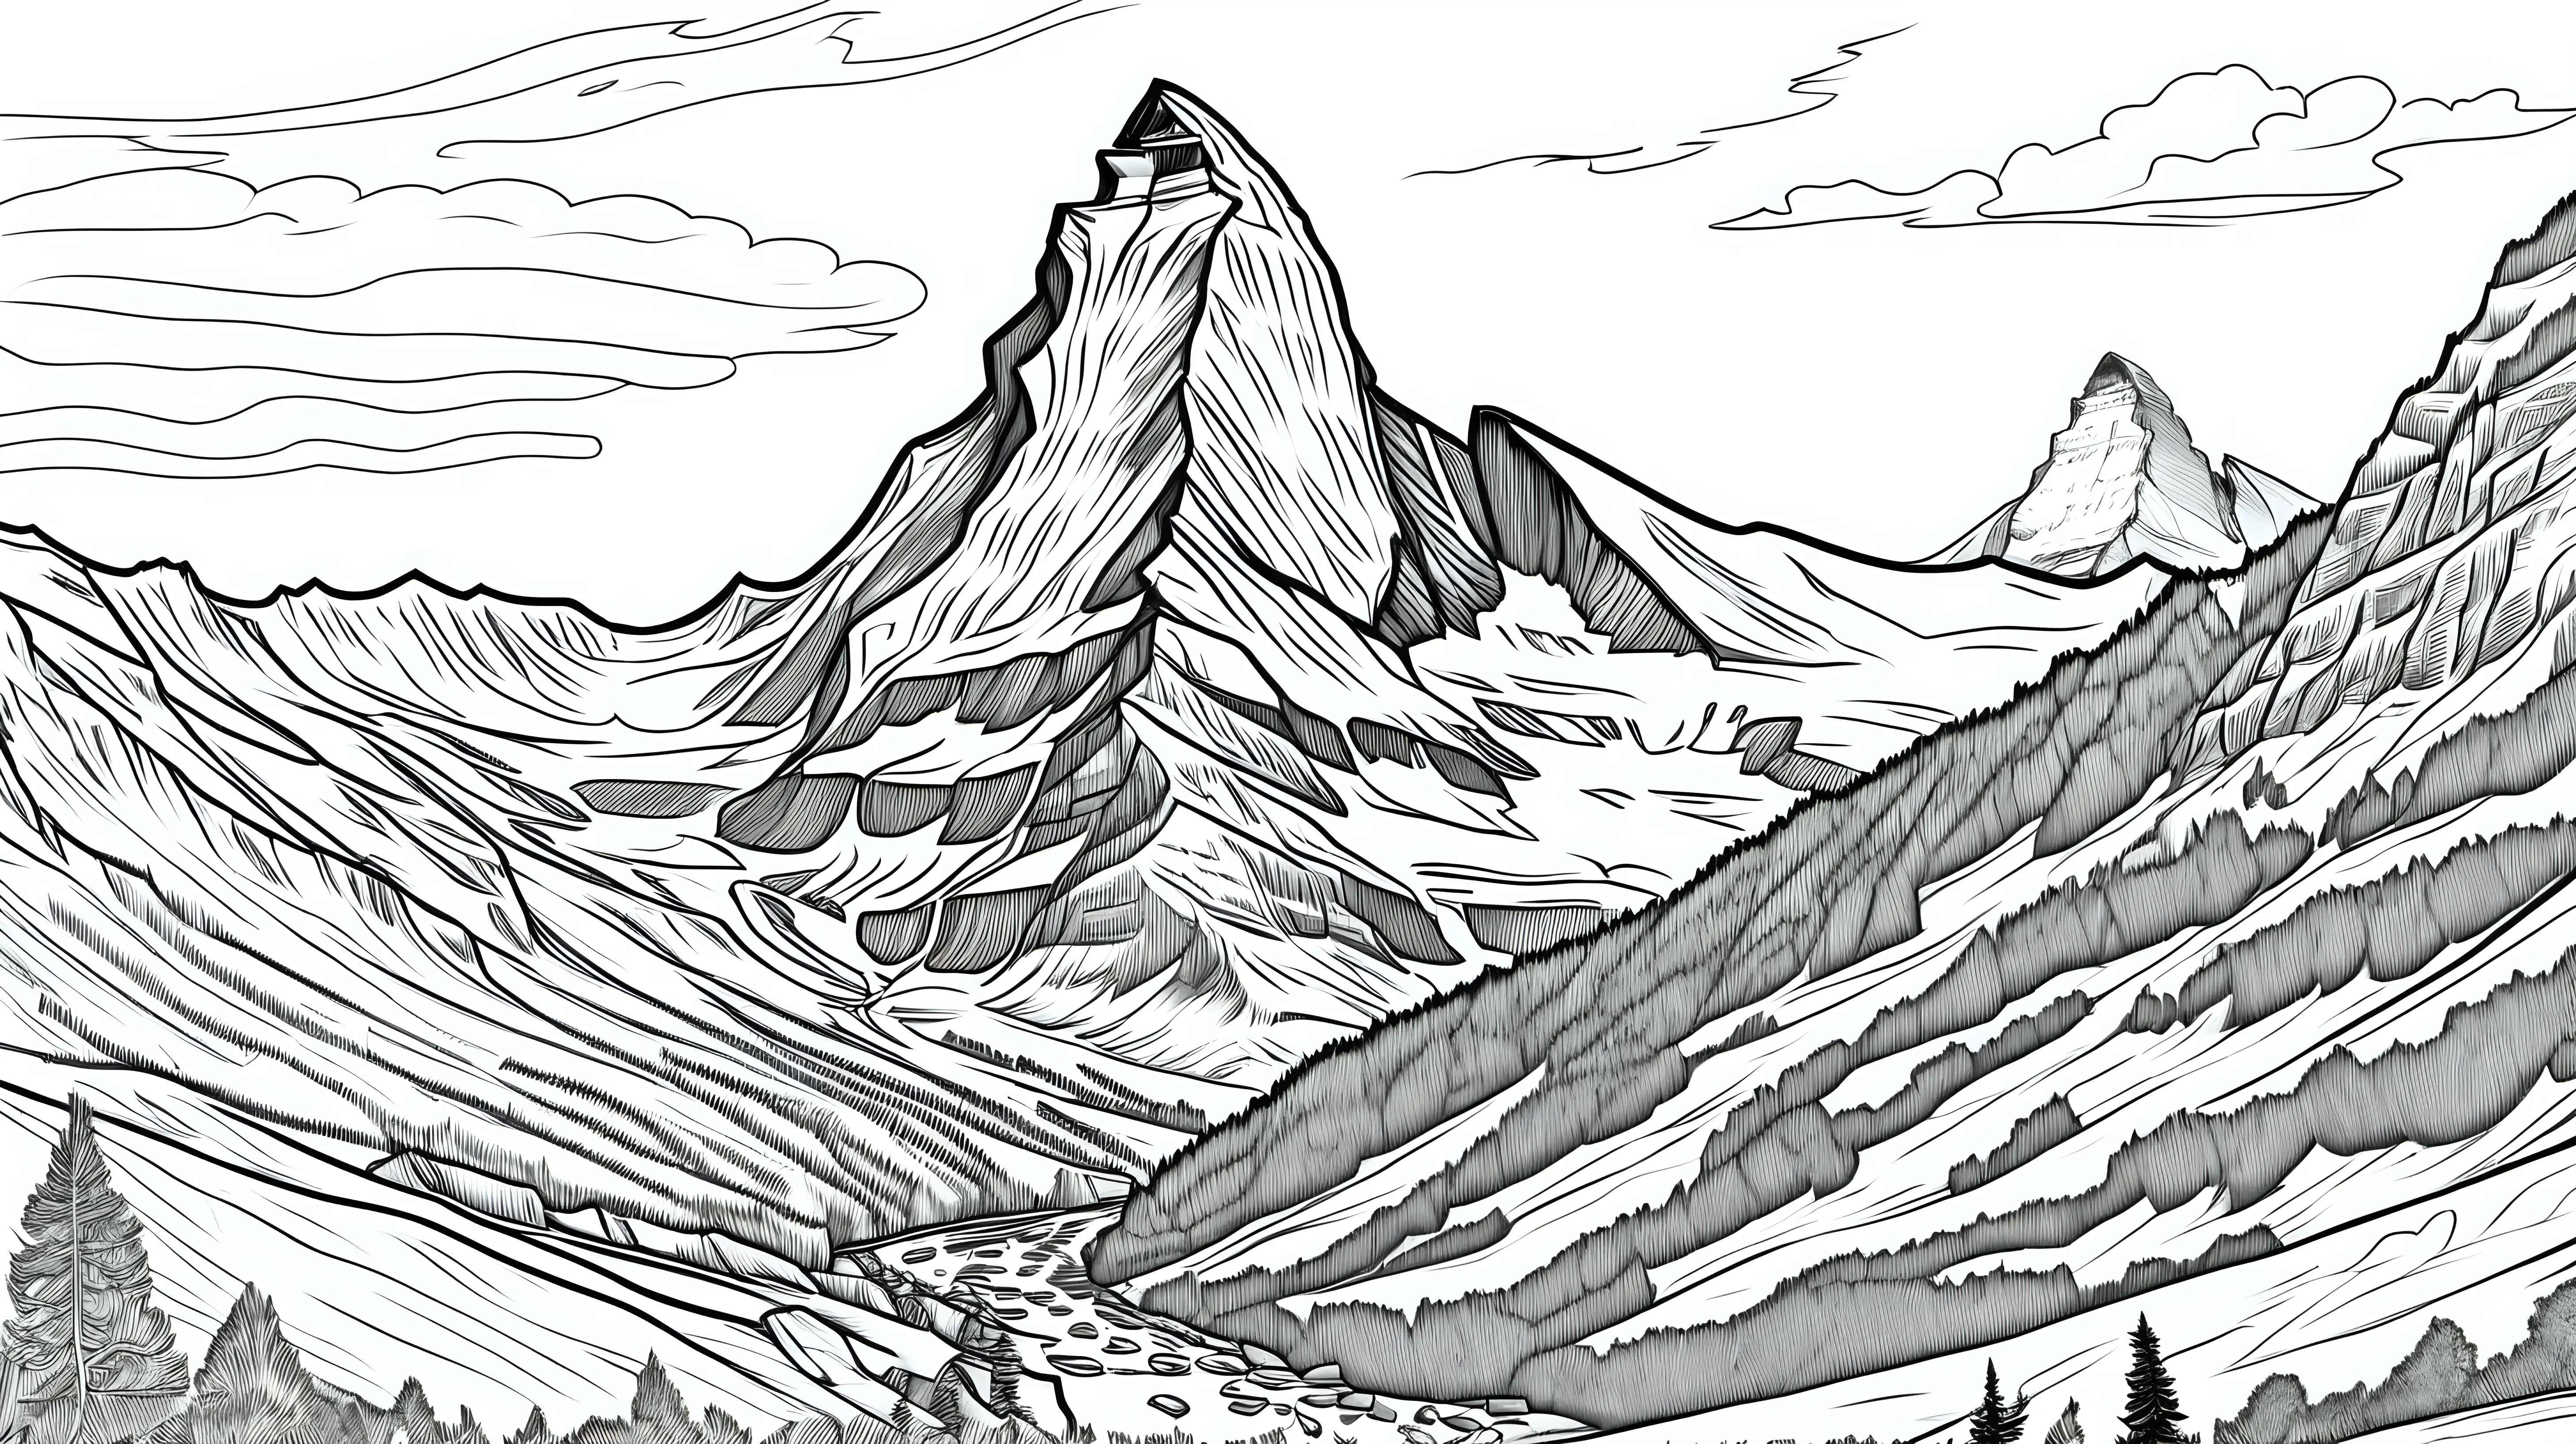 low detail coloring page of the Matterhorn with hiking trail in the foreground